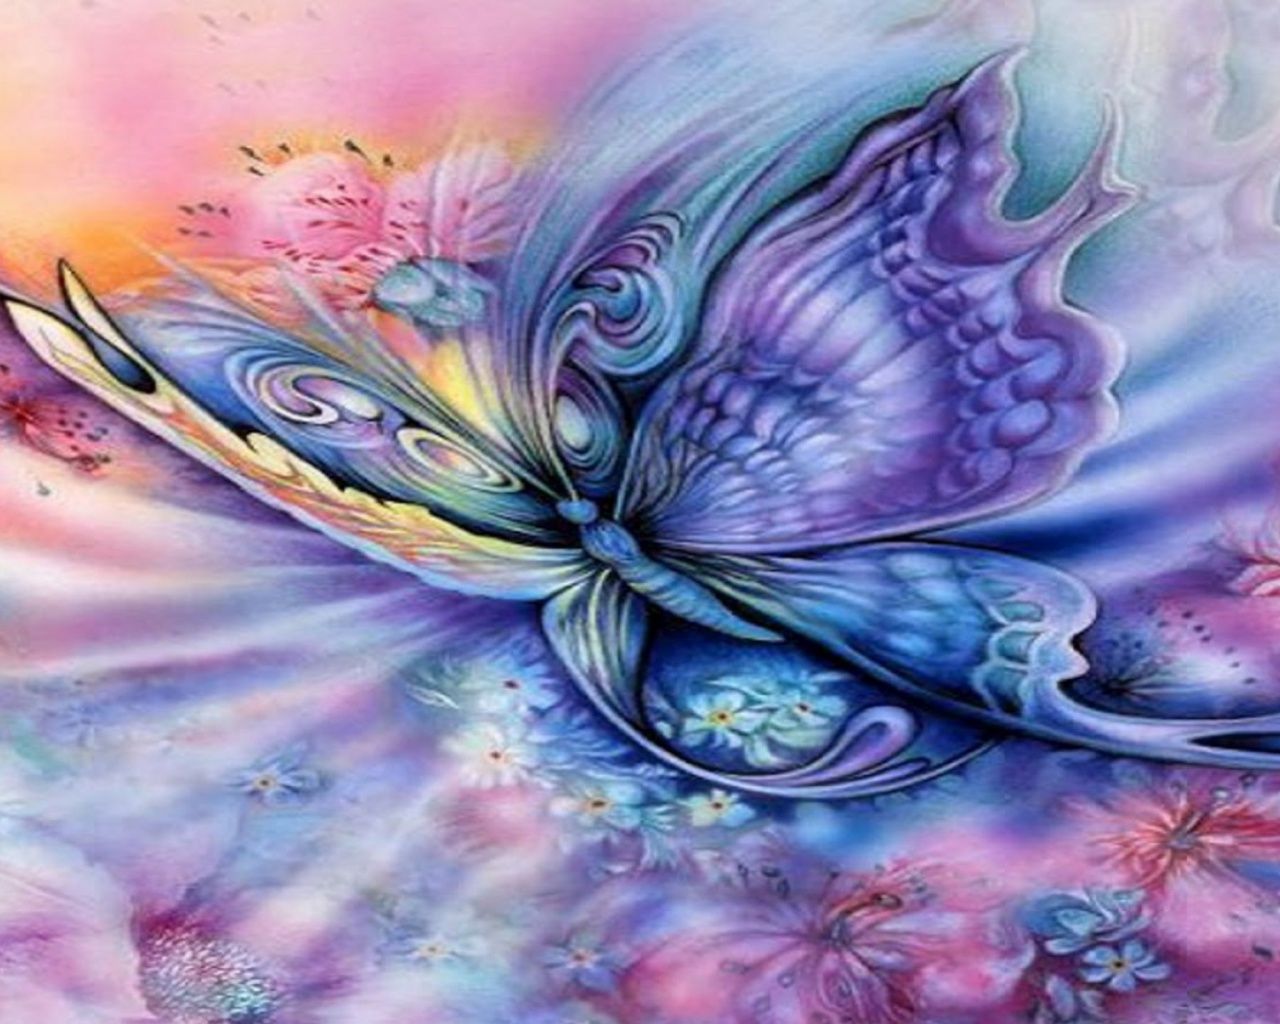 Pastel Butterfly Background